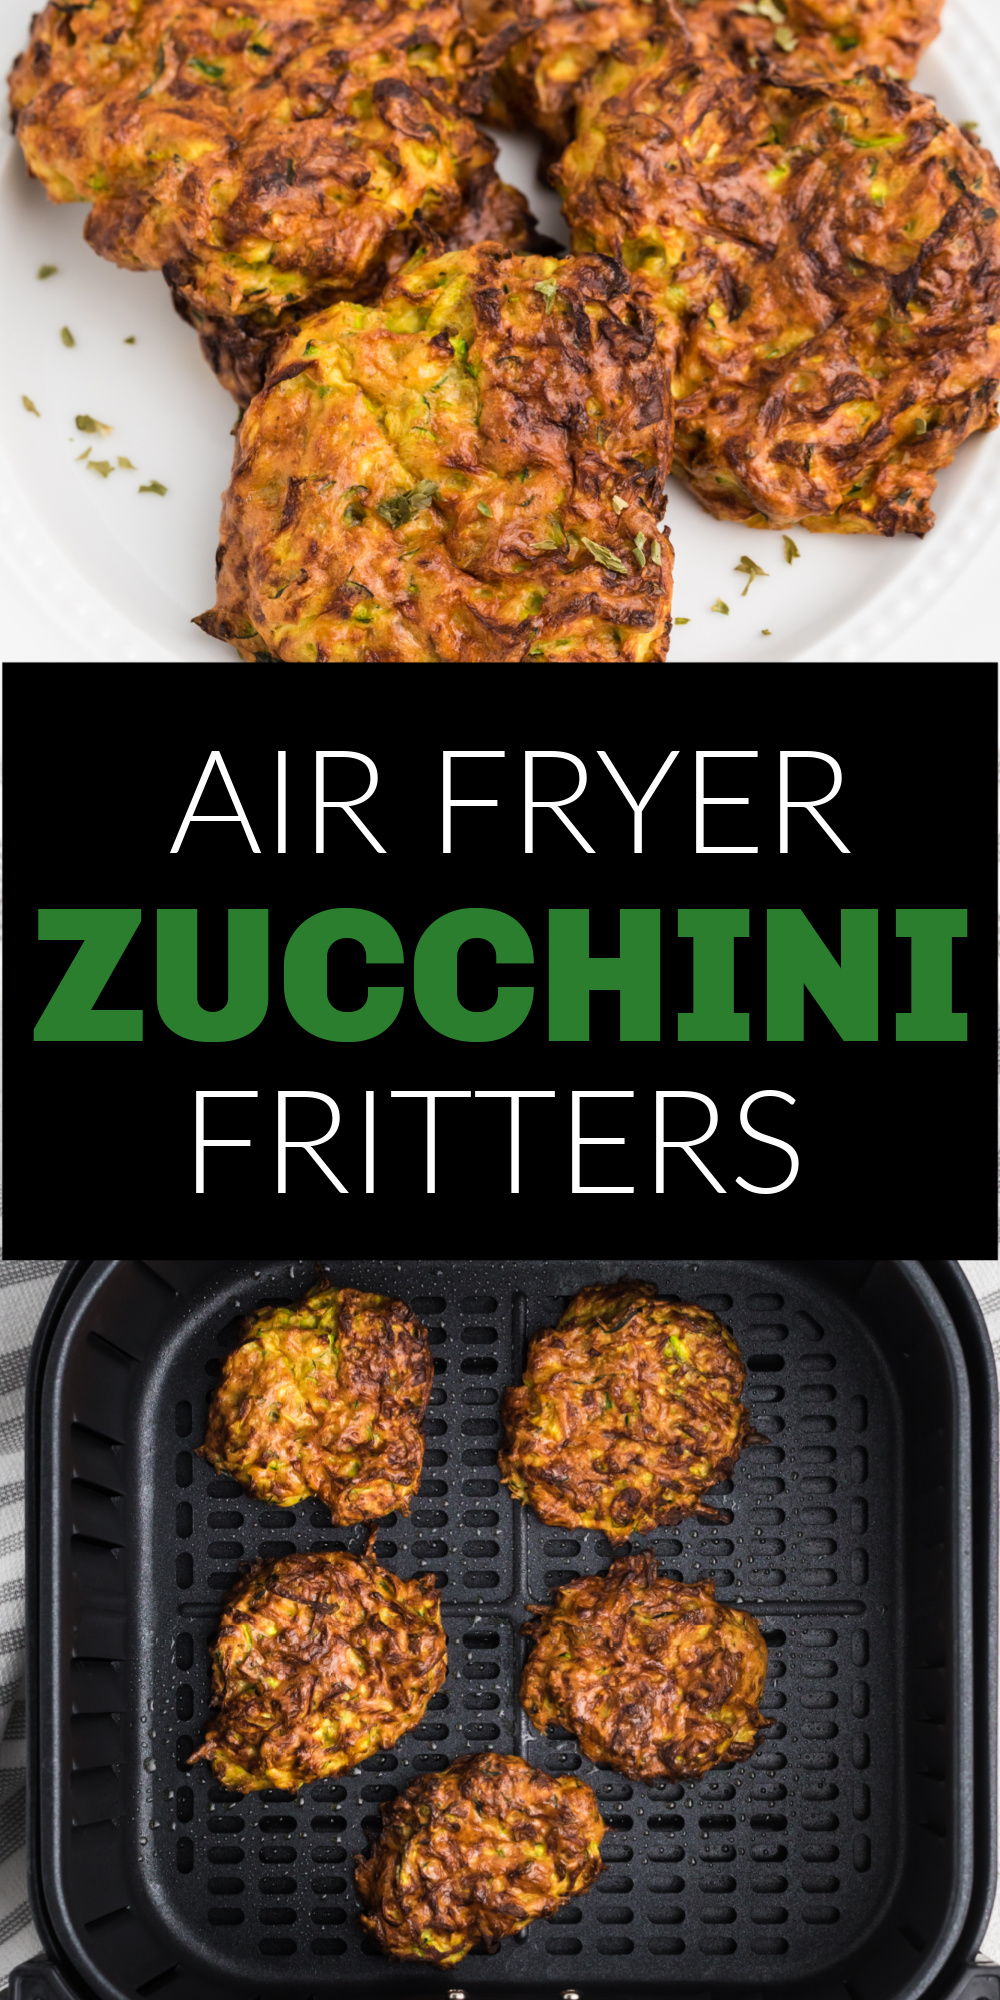 Ready to enjoy in under 20 minutes of time, these Air Fryer Zucchini Fritters are the perfect side dish or simple appetizer for any meal! They're also a delicious snack to add some health benefits to your daily diet, too.